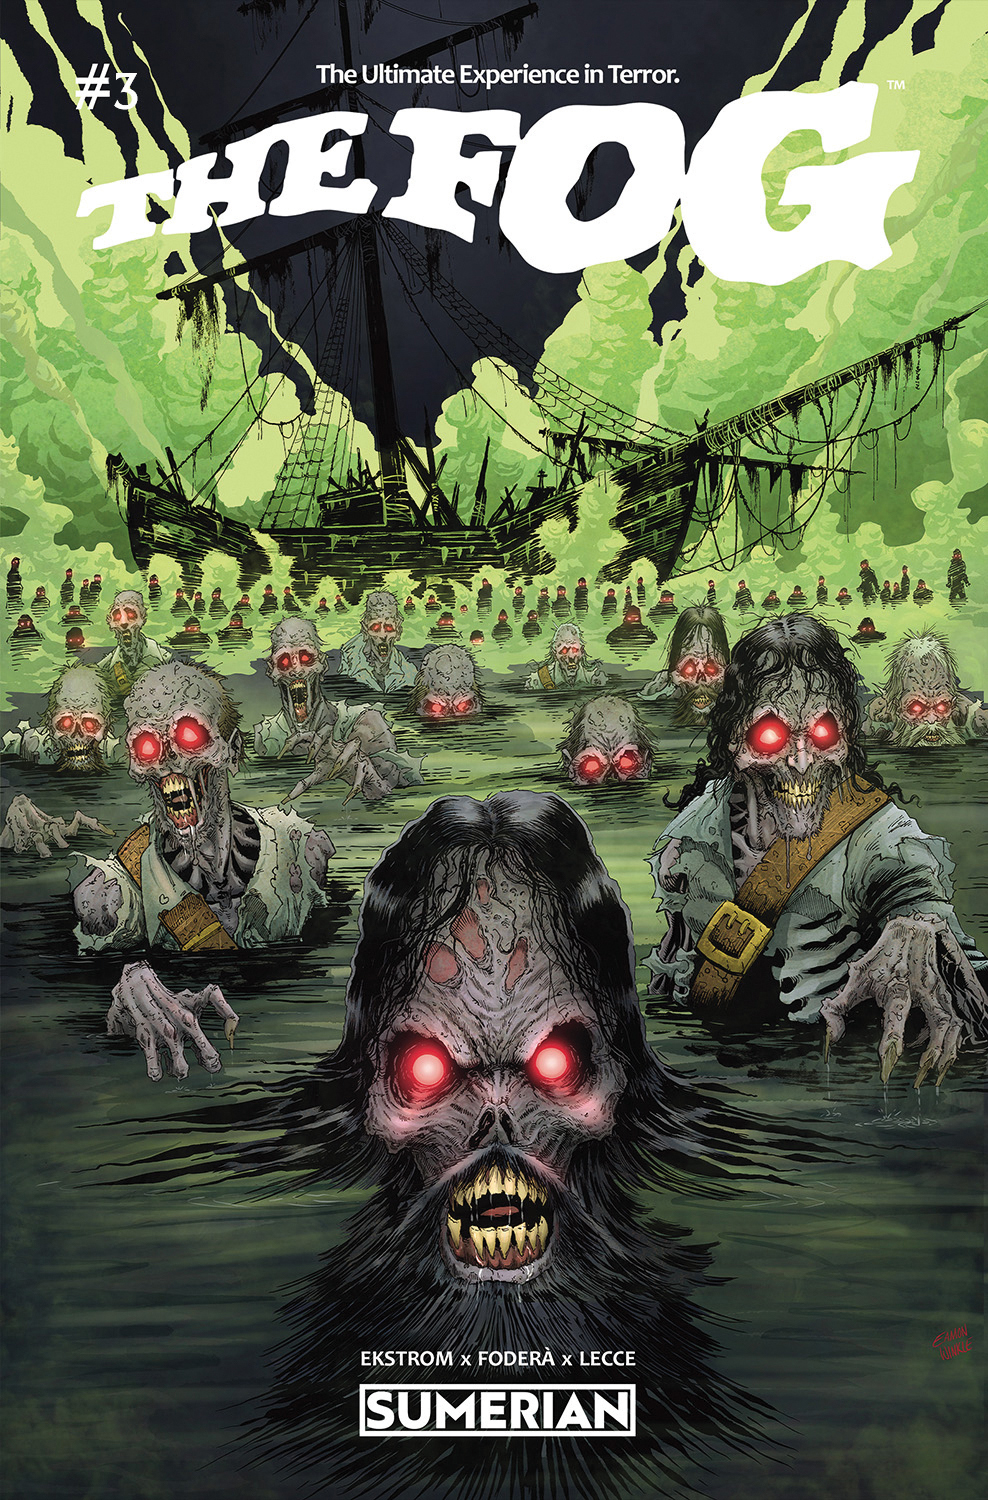 The Fog #3 Cover B Winkle (Mature) (Of 4)